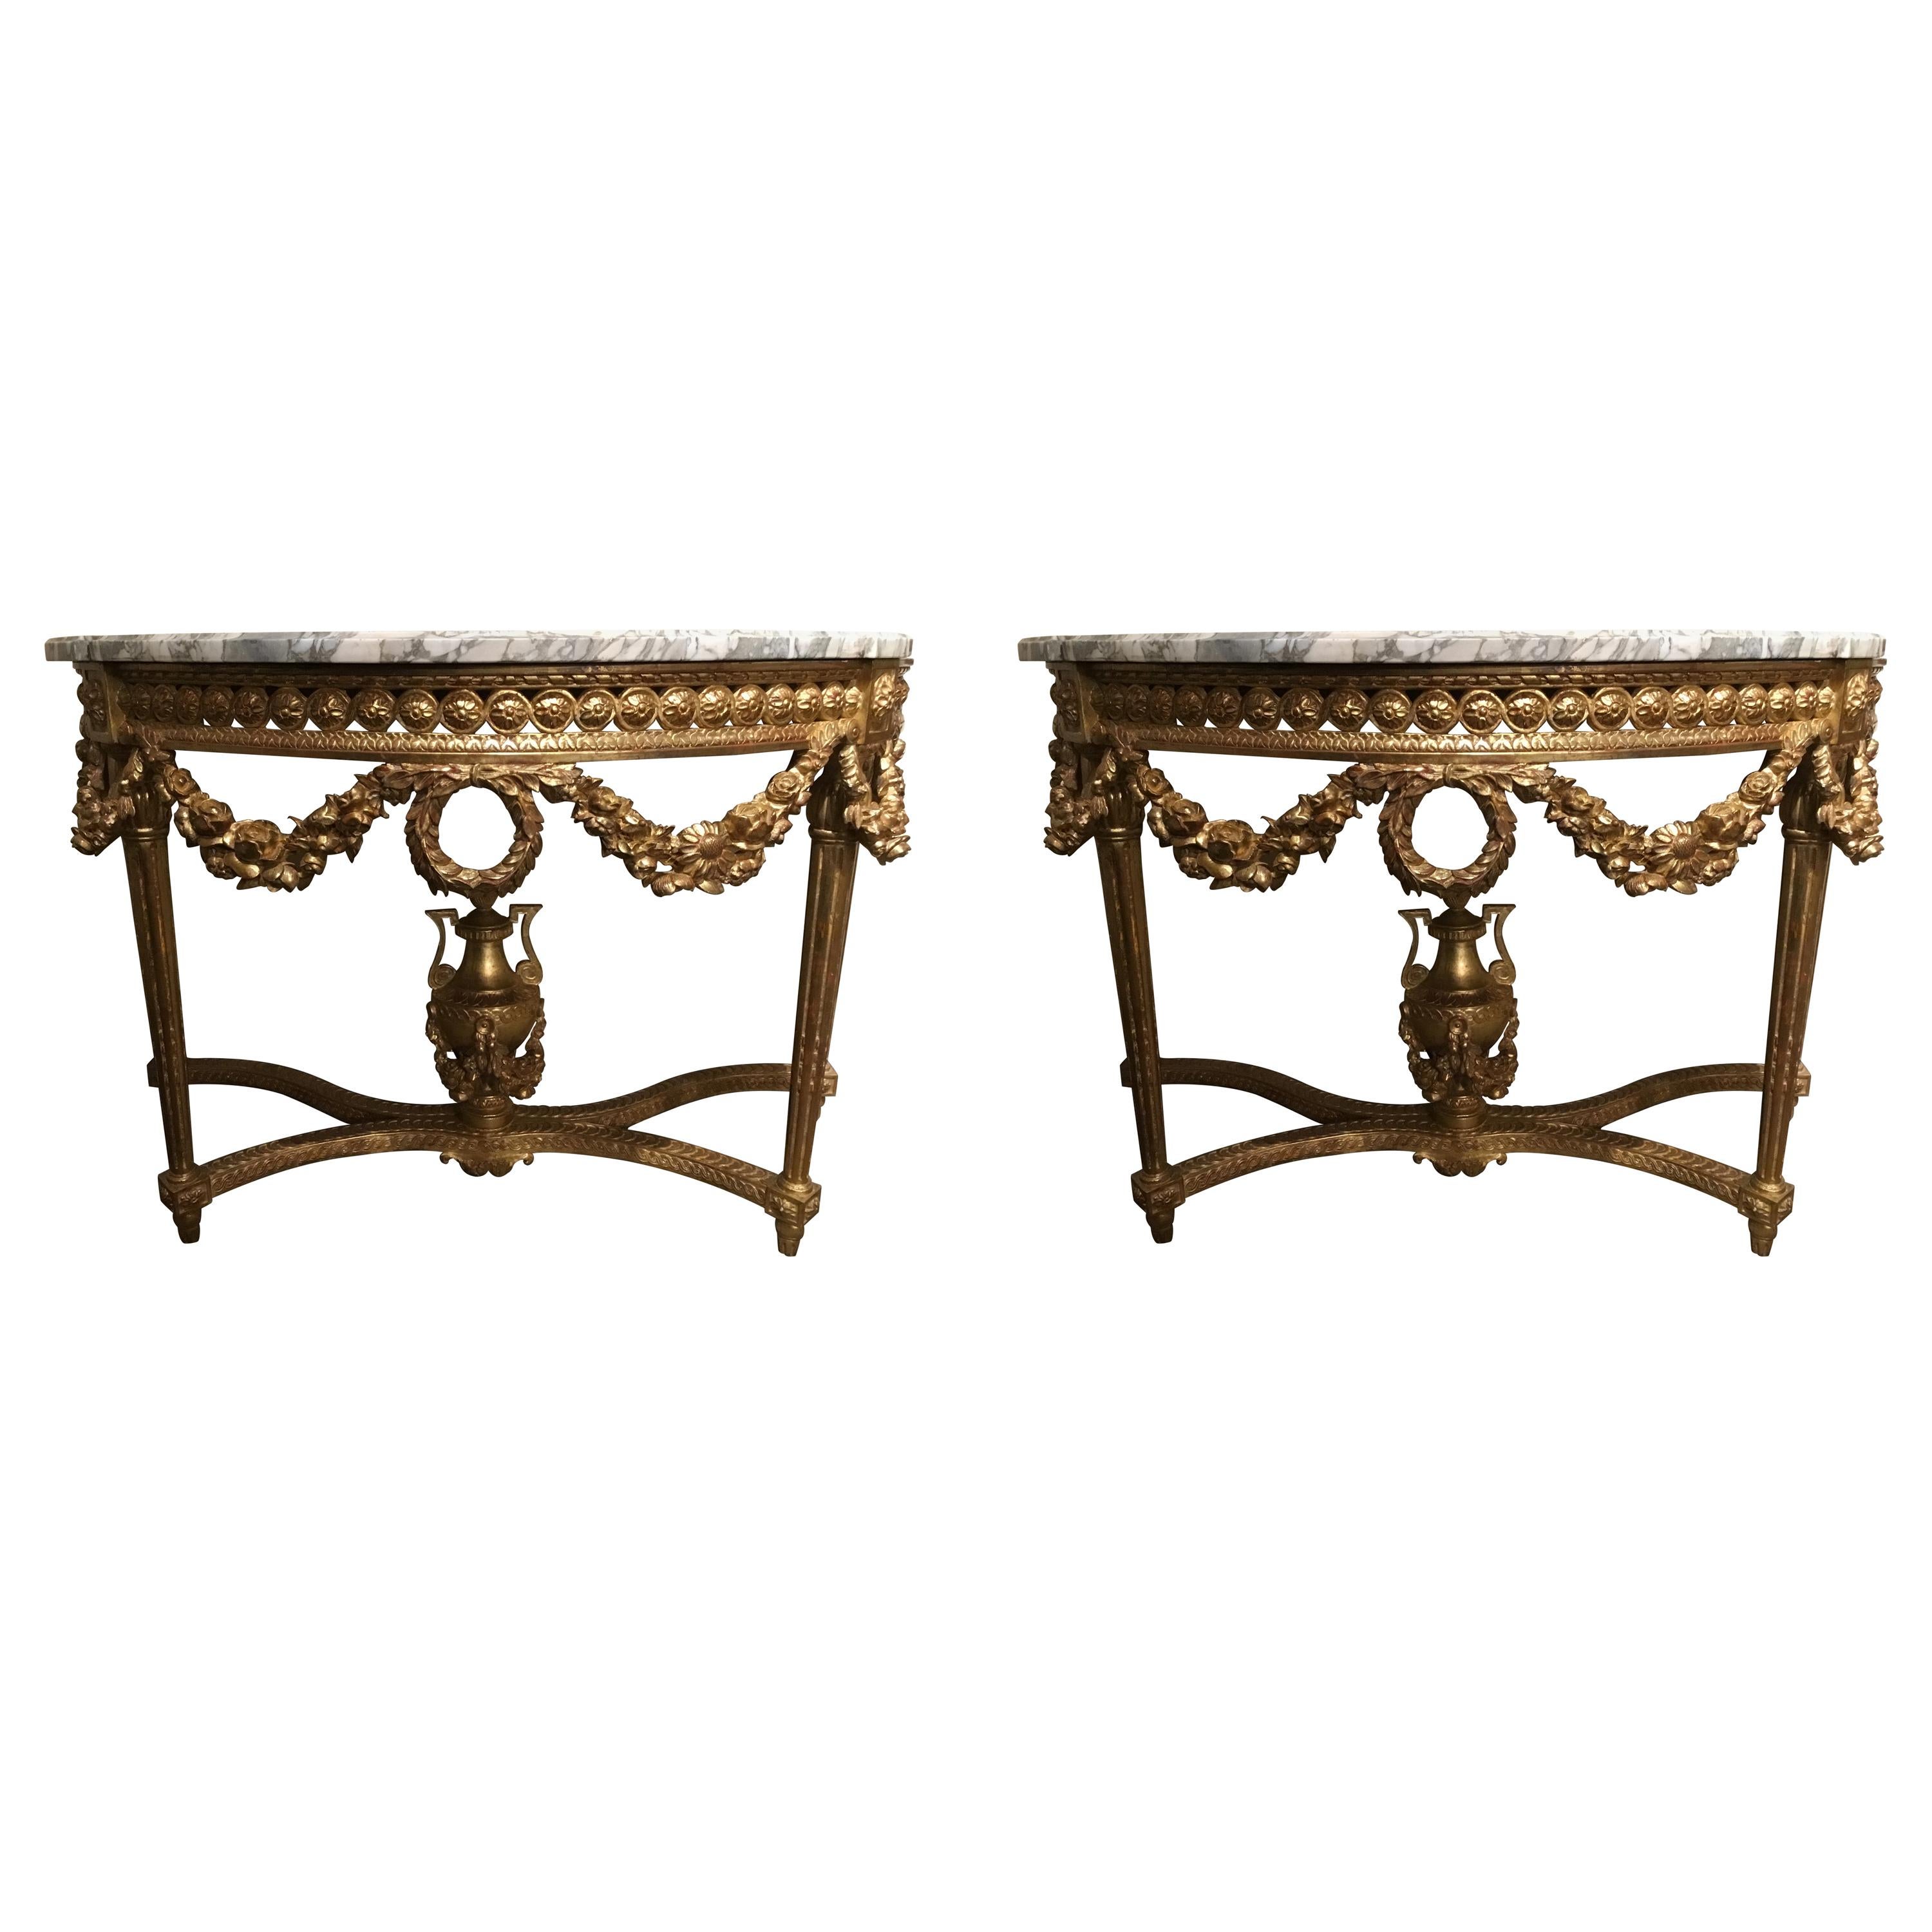 Pair of Louis XVI Style Giltwood Consoles with White and Gray Marble Tops